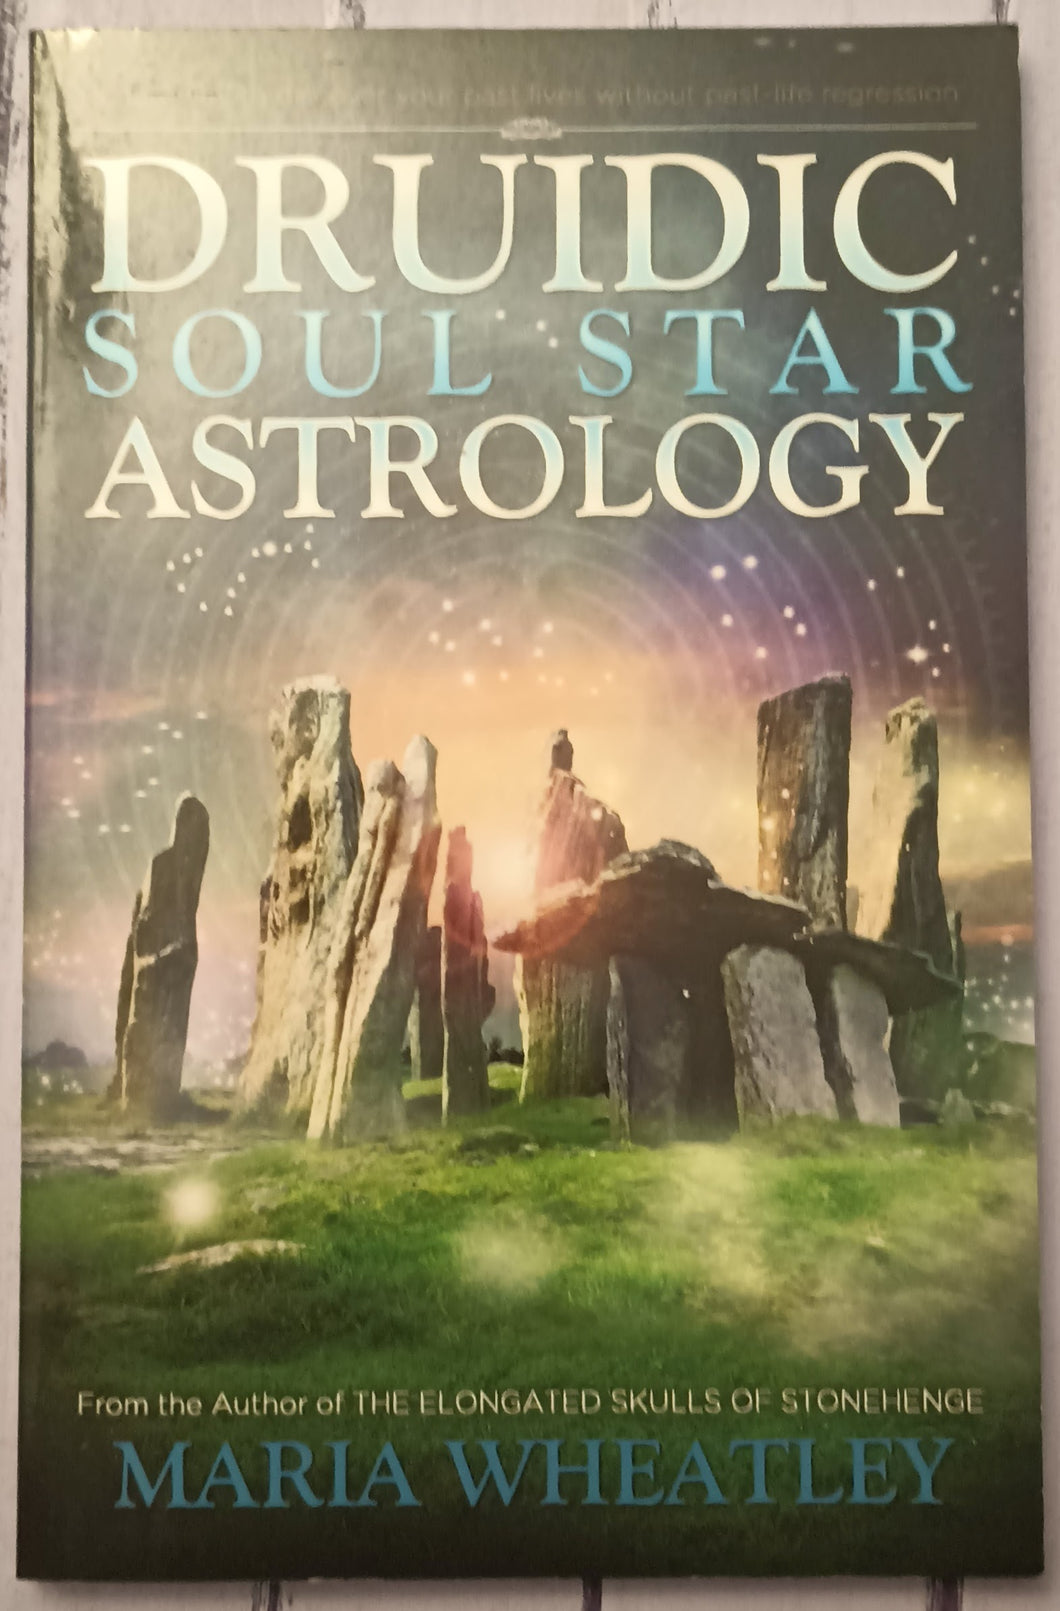 Druidic Soul Star Astrology: A New Way to Discover Your Past Lives Without Past-Life Regressions